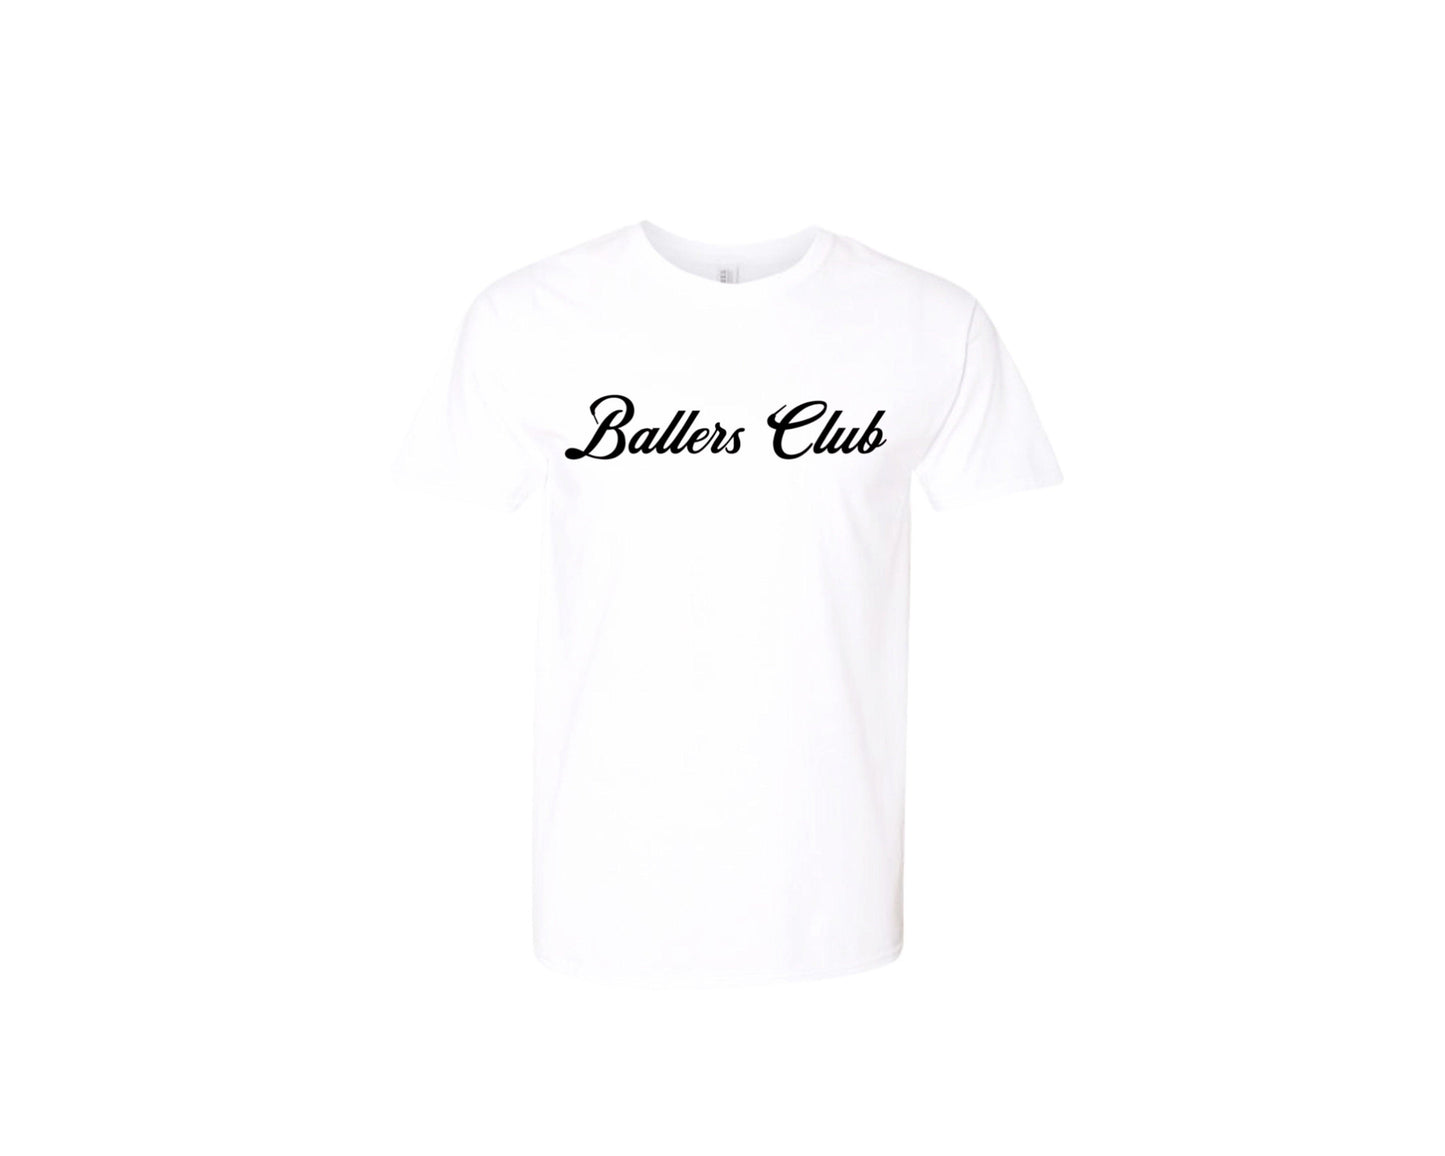 Exclusive Ballers Club T-Shirt - Image 01 - Only at www.BallersClubKickz.com - This is an Exclusive Ballers Club premium T-Shirt made with premium 100% Cotton.